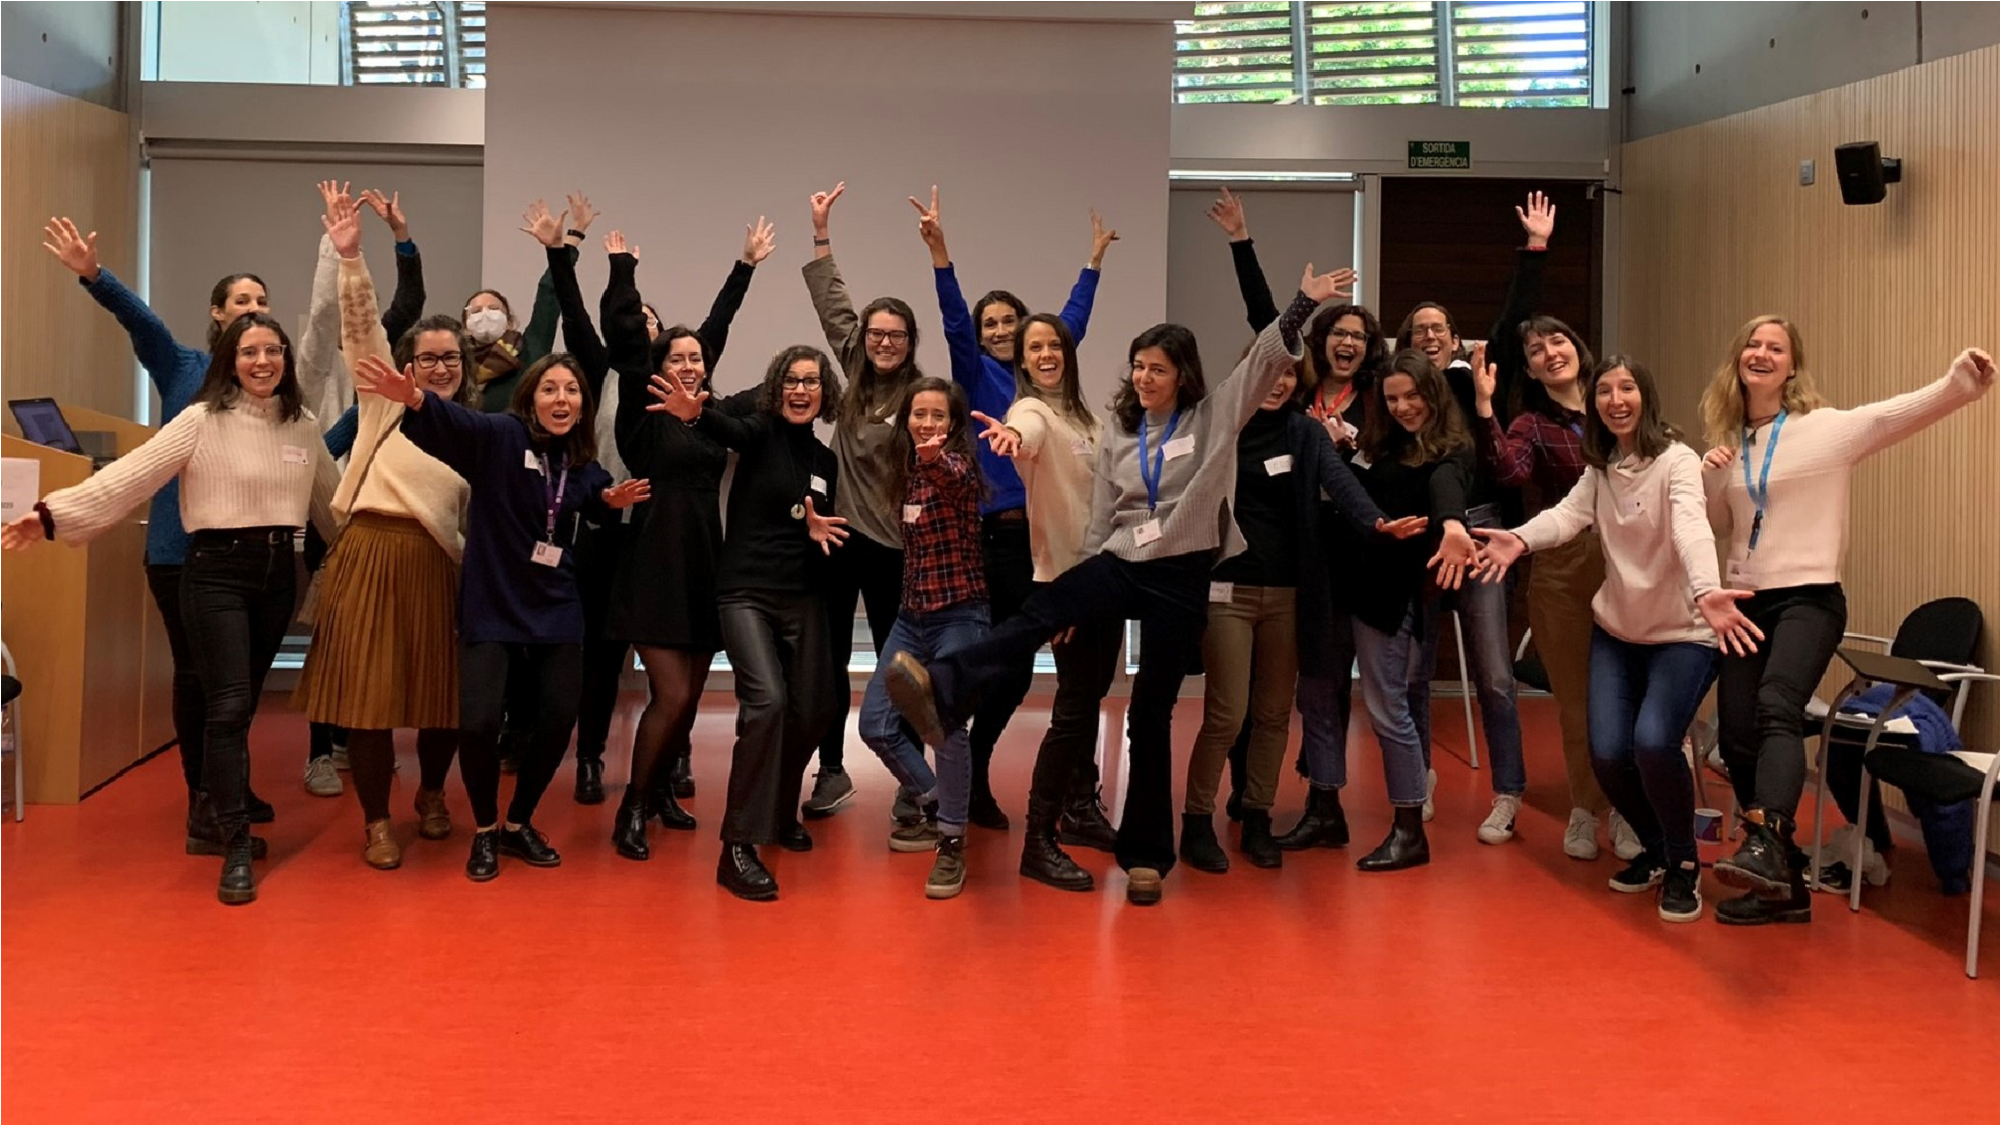 When female scientists get together, magic happens